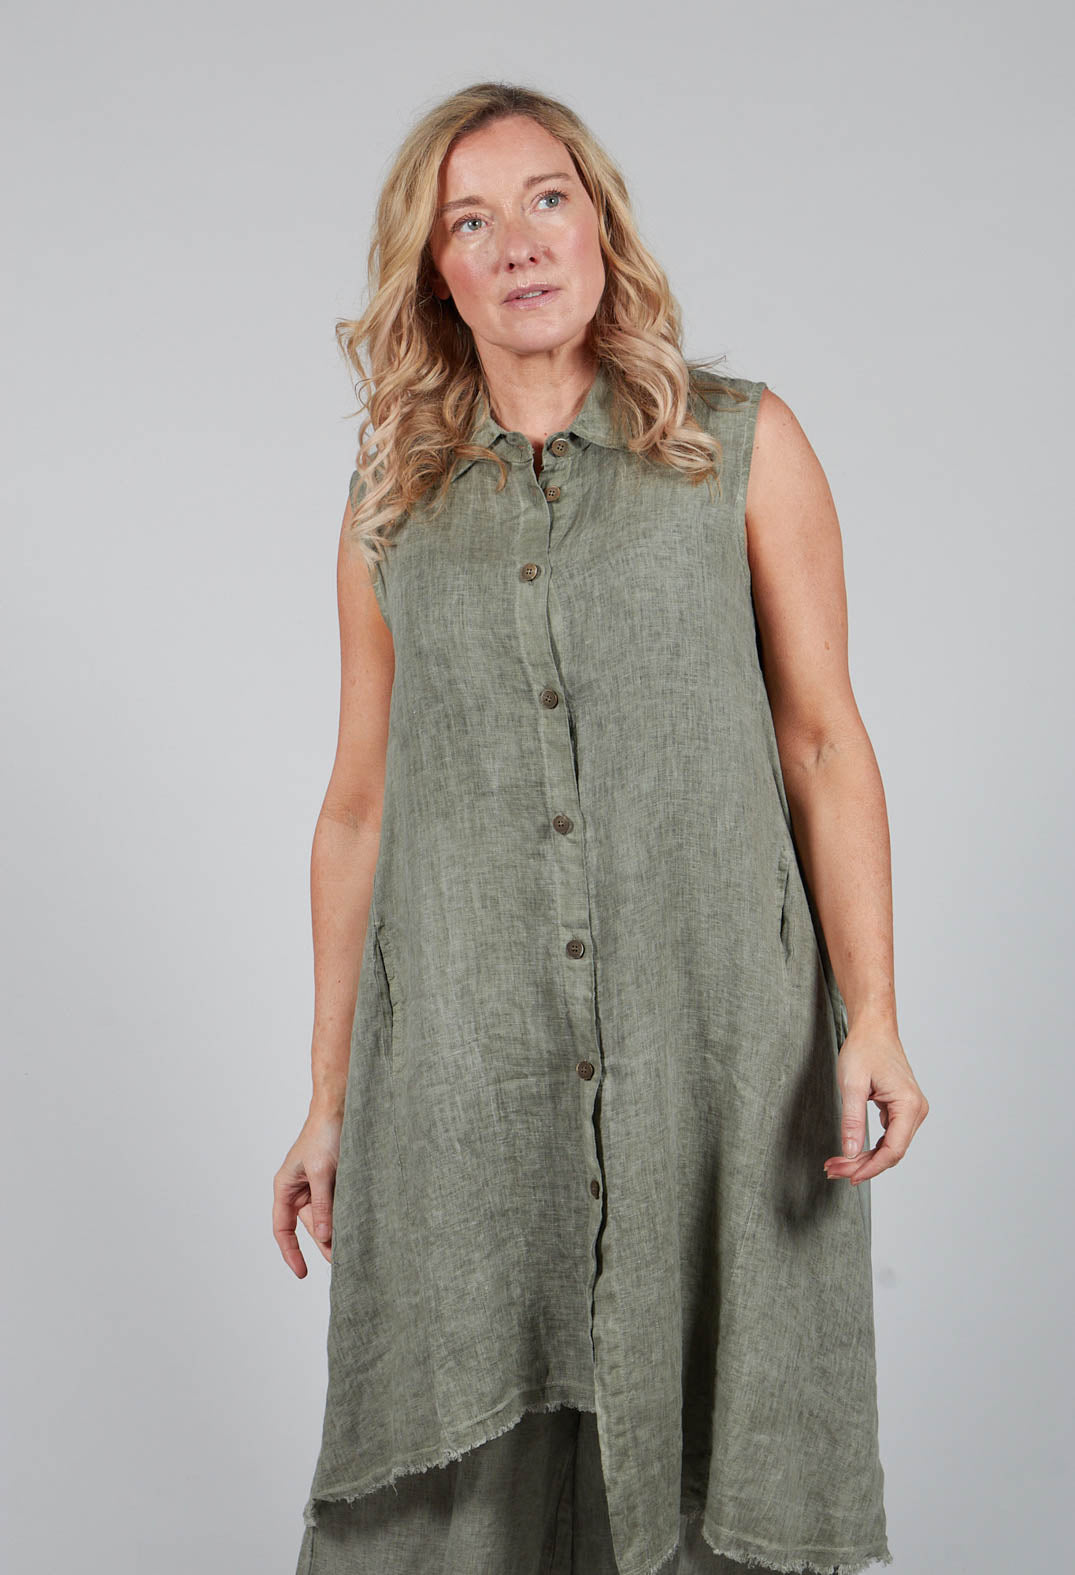 Sleeveless Dress in Lino and Tinto Freddo Olive